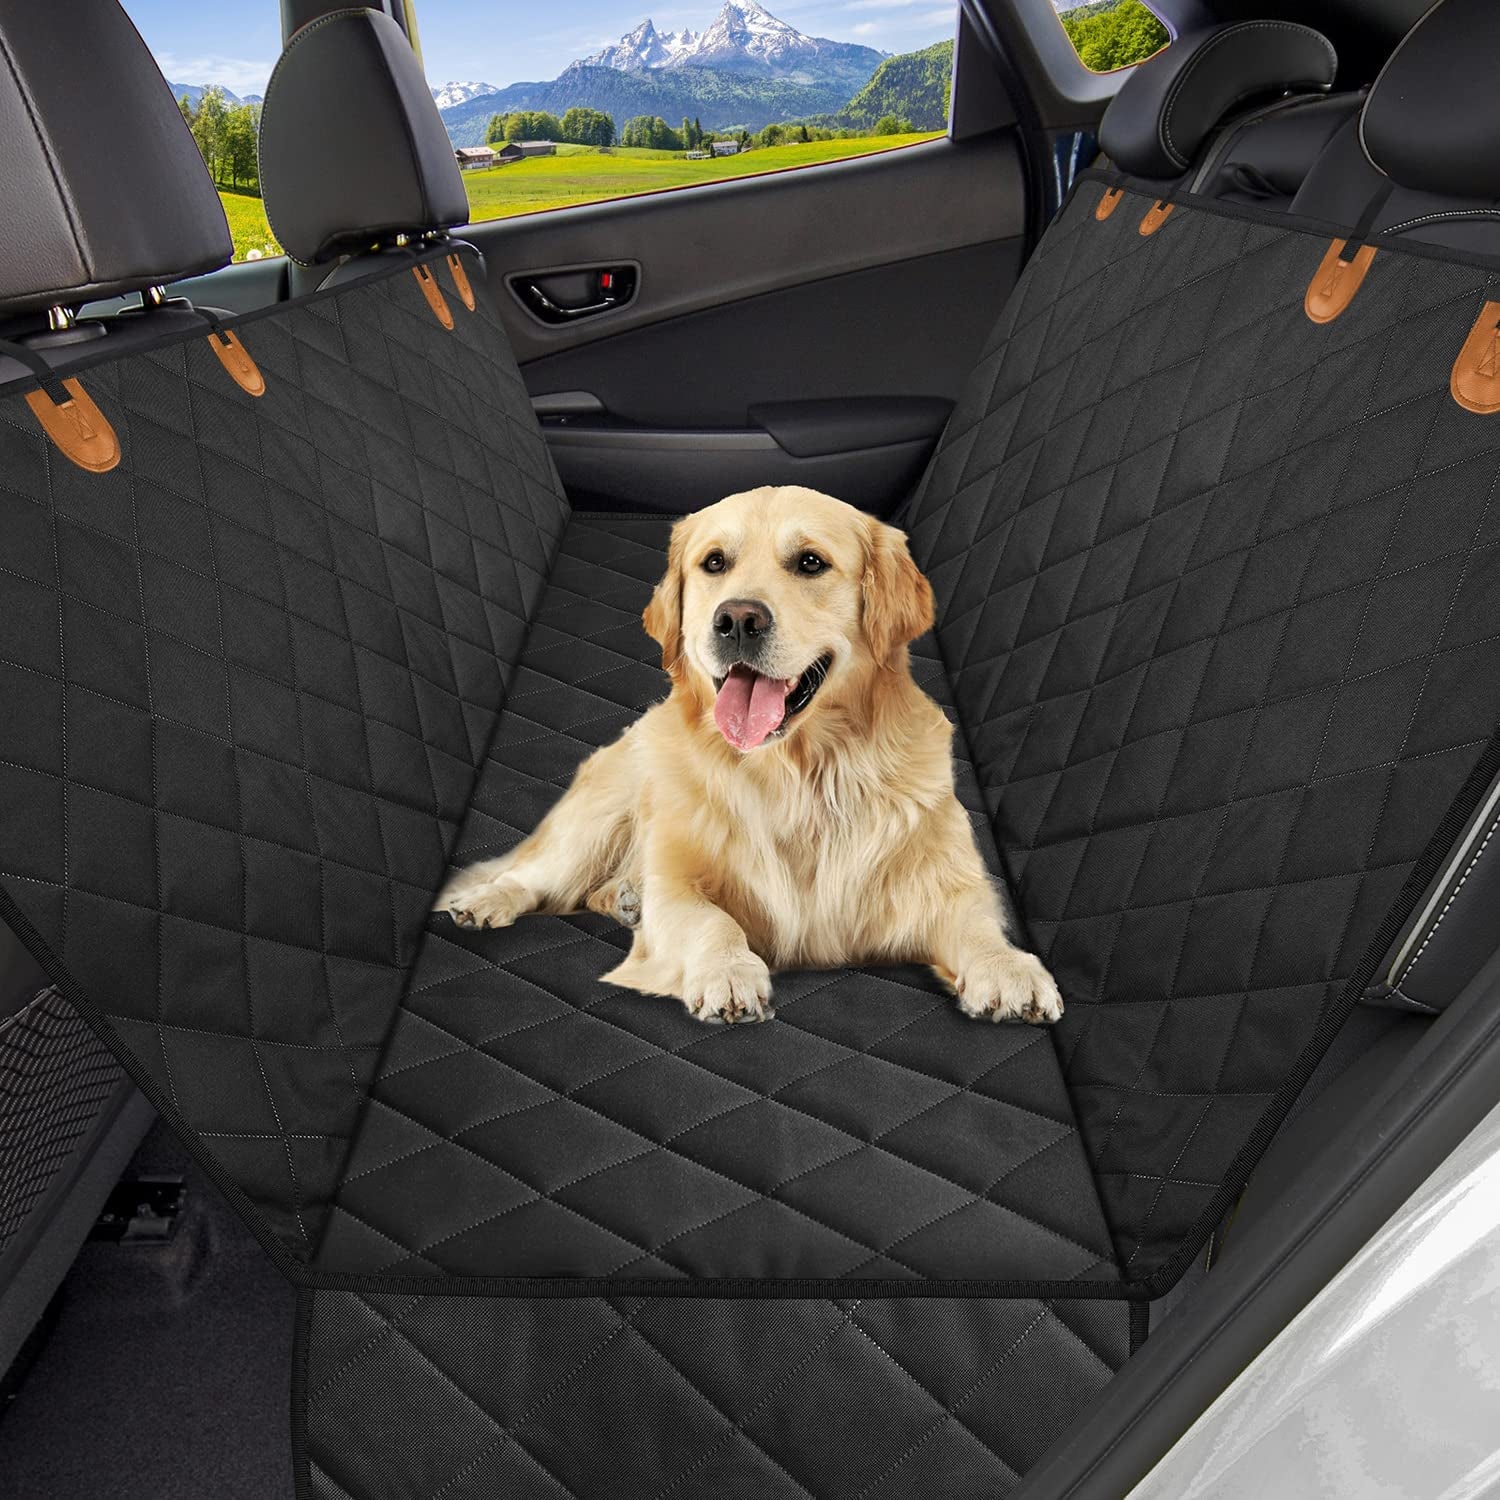 Upgraded Dog Car Seat Cover Pet Seat Covers for Back Seat, Scratch Proof & Nonslip Backing & Hammock, 600D Heavy Duty Dog Seat Cover for Cars, Trucks and Suvs